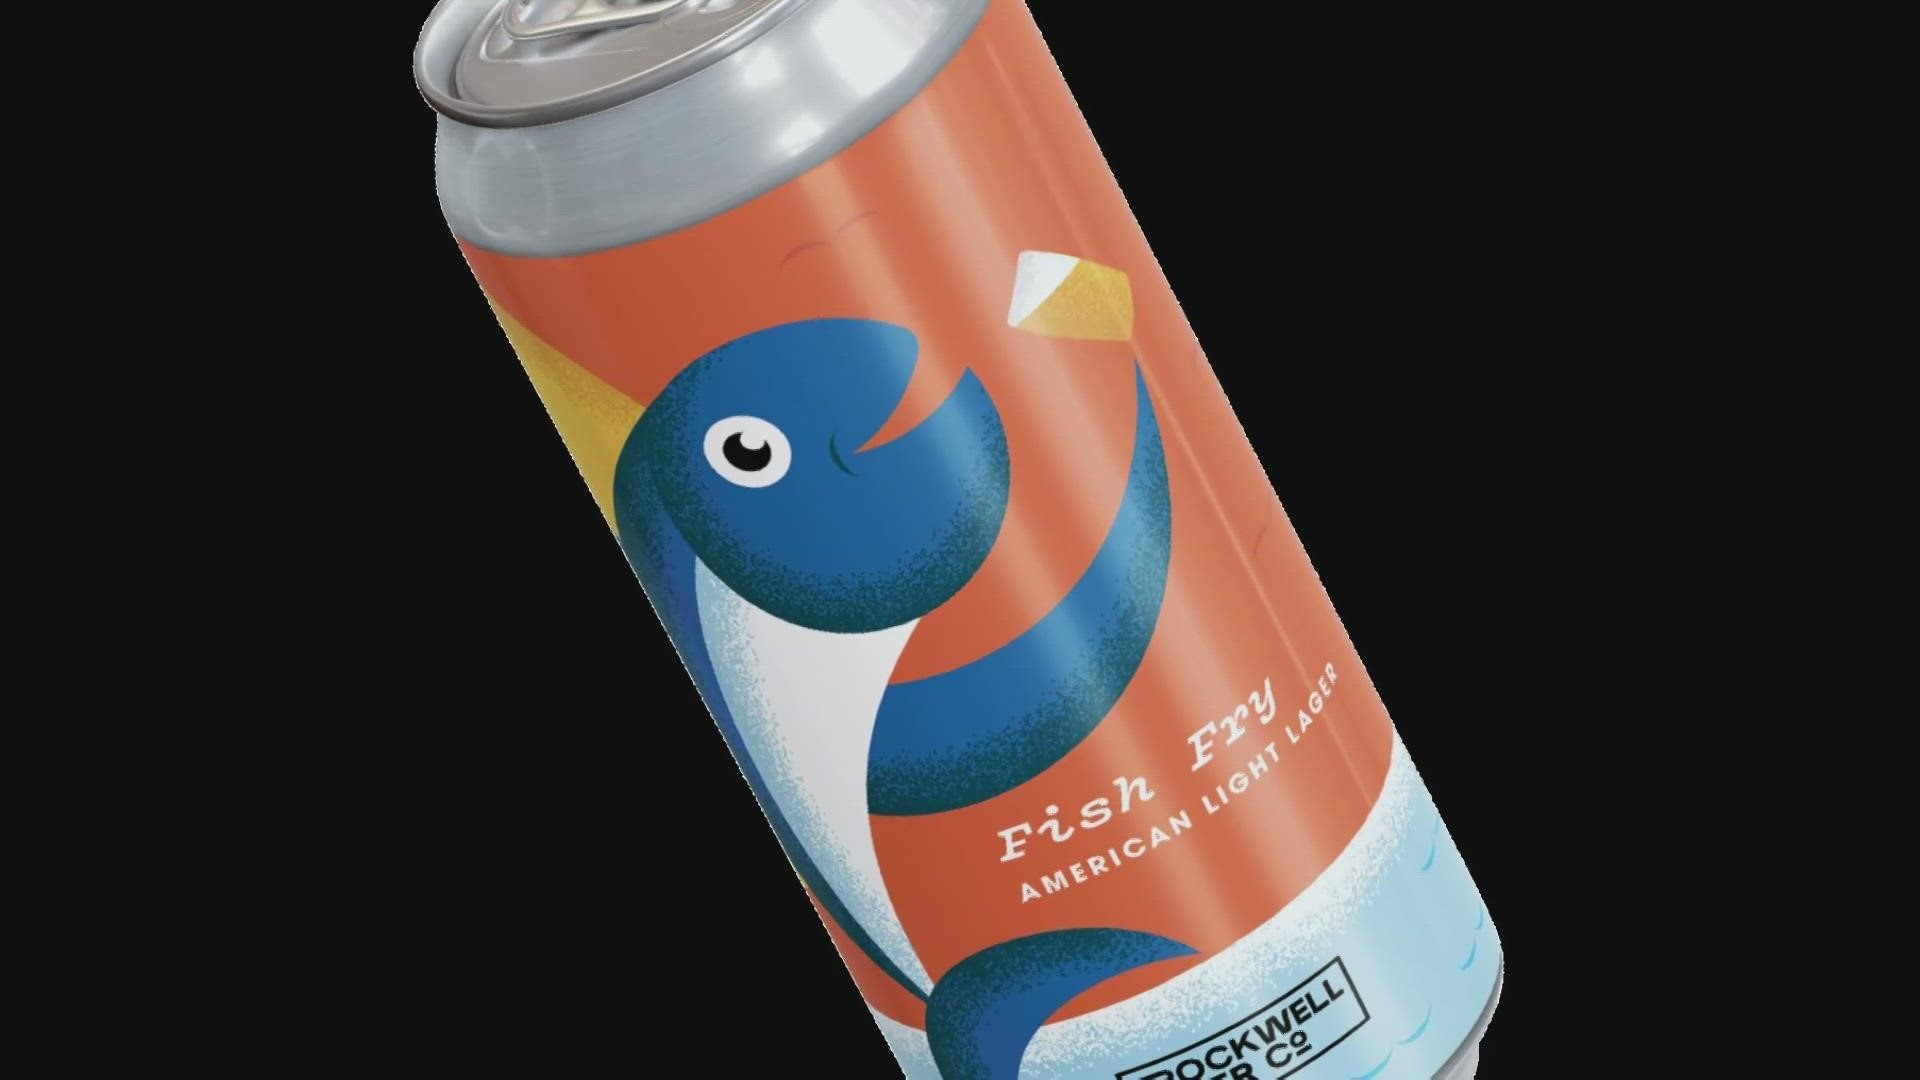 Designed to pair with fried fish, the American light lager is described as "dry and delicately floral, without being fussy." The beer is available until Easter.